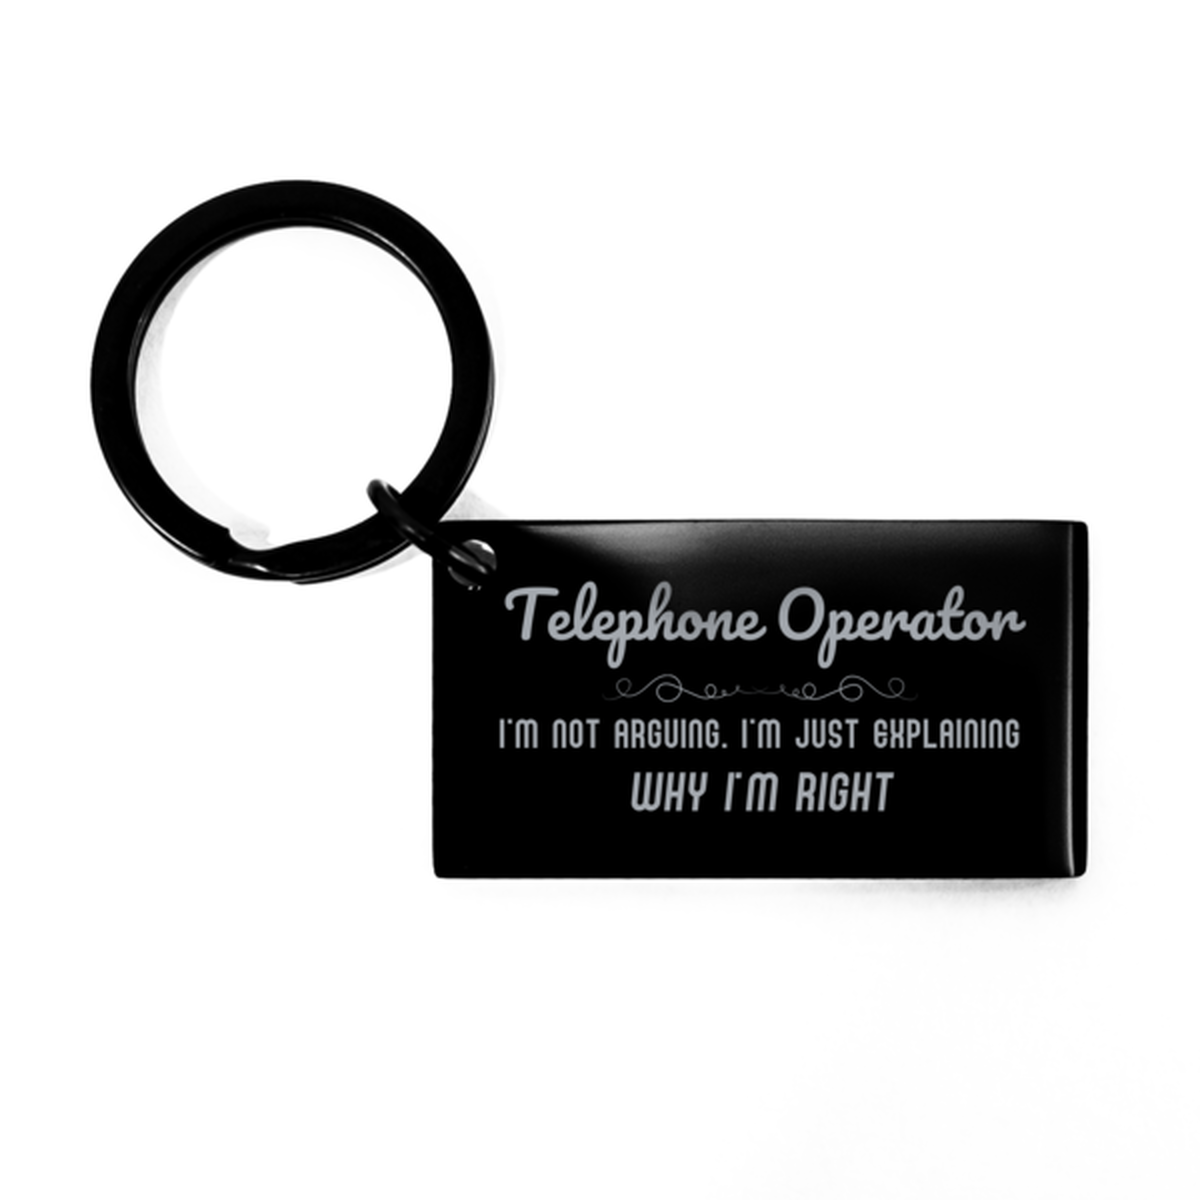 Telephone Operator I'm not Arguing. I'm Just Explaining Why I'm RIGHT Keychain, Funny Saying Quote Telephone Operator Gifts For Telephone Operator Graduation Birthday Christmas Gifts for Men Women Coworker